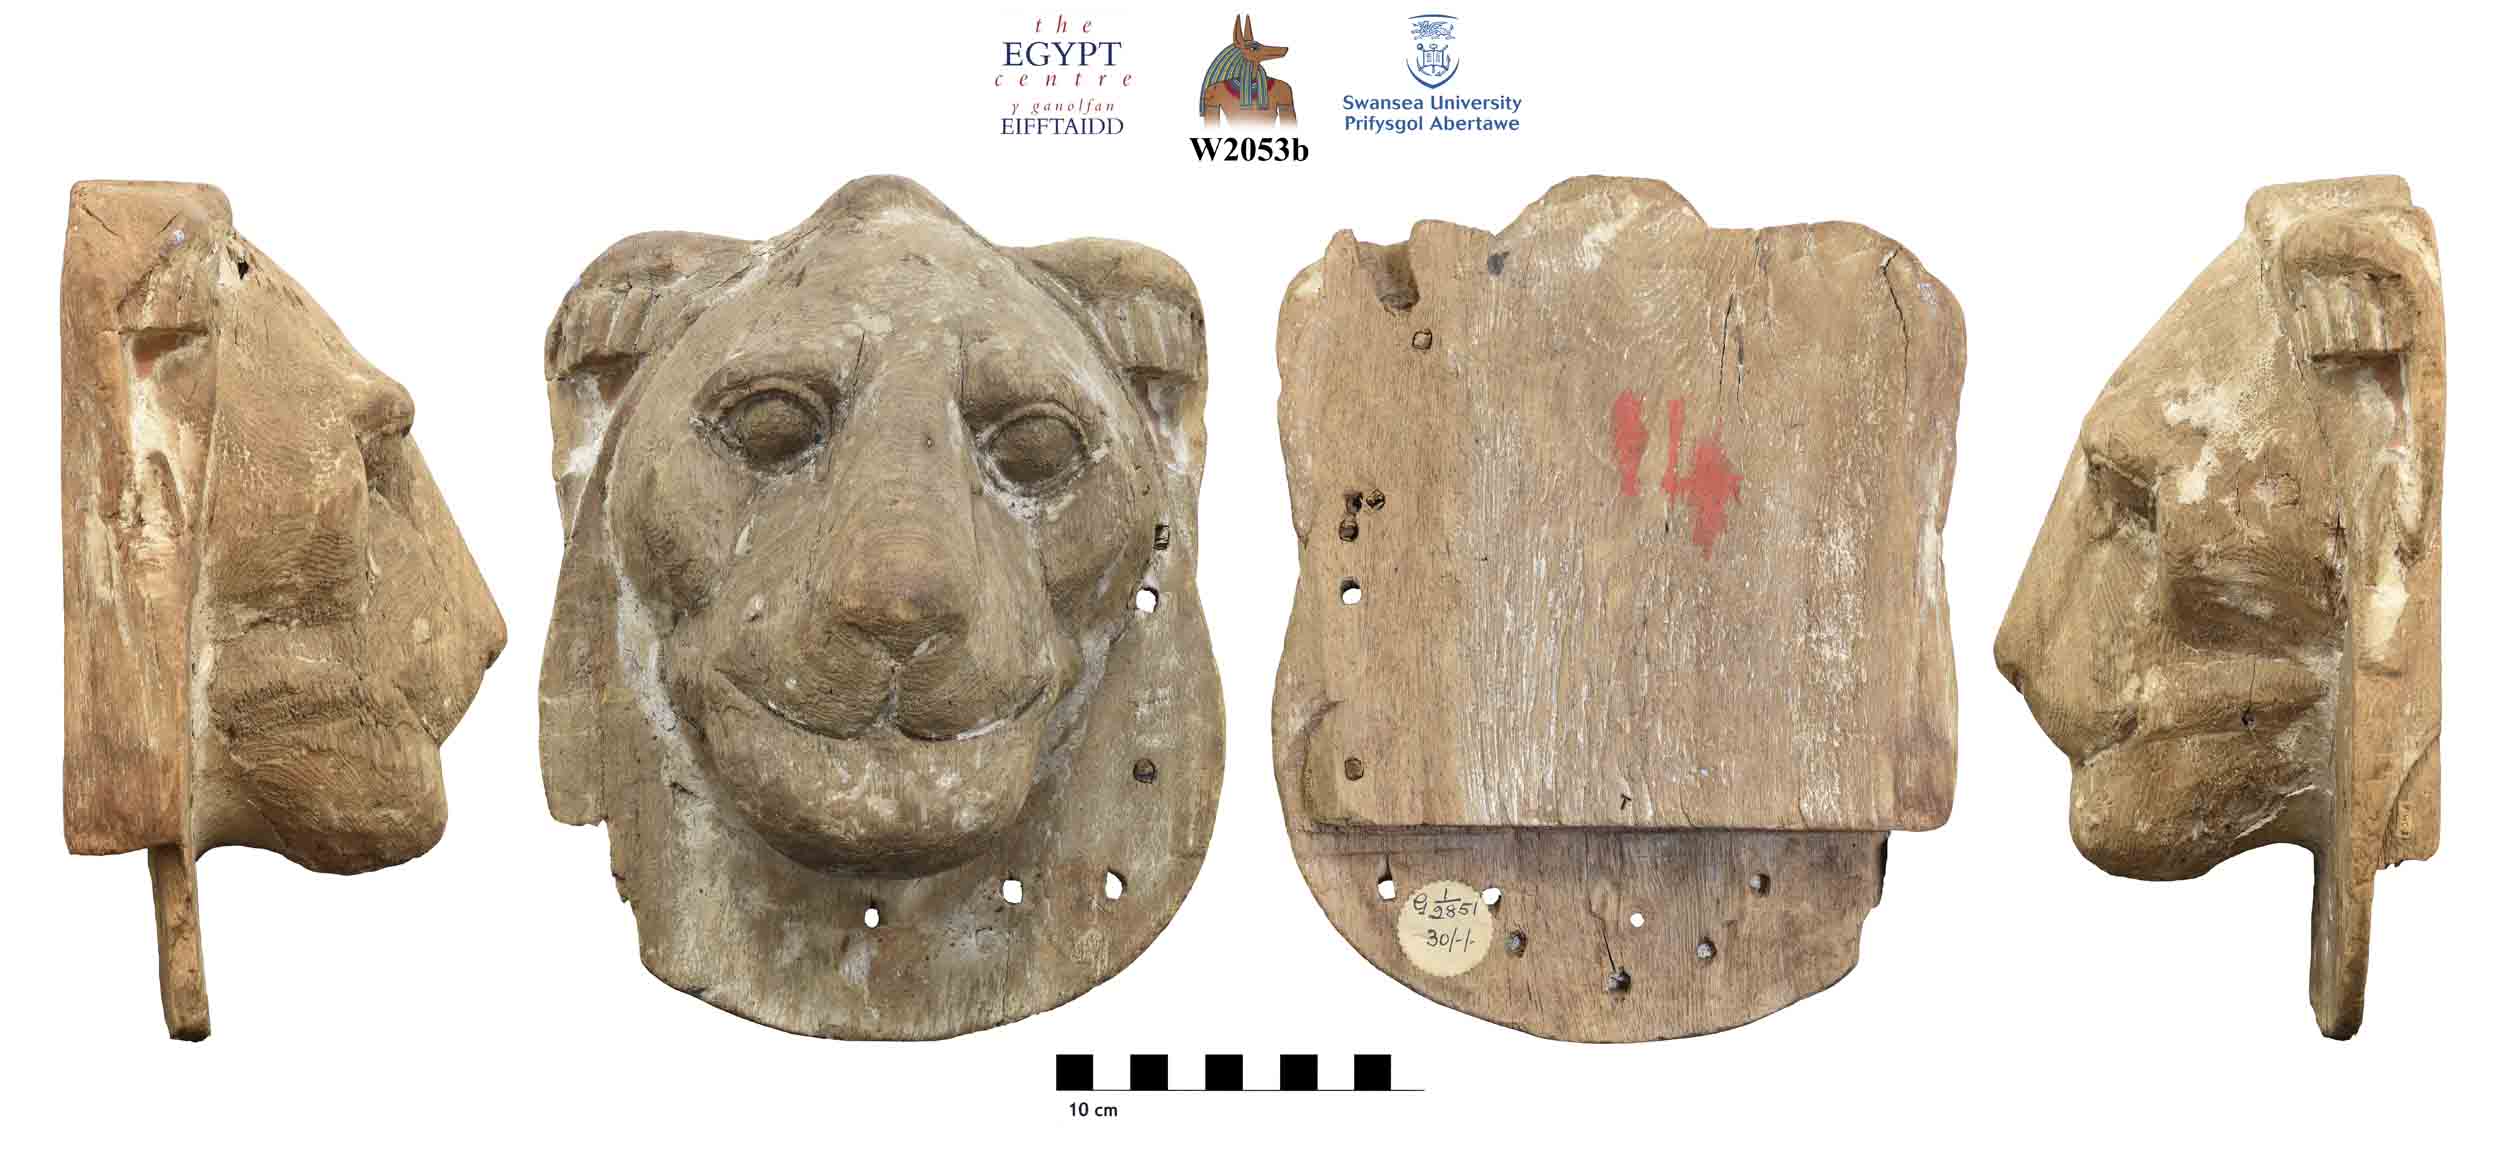 Image for: Terminal of a bed or seat in the form of a lion's head